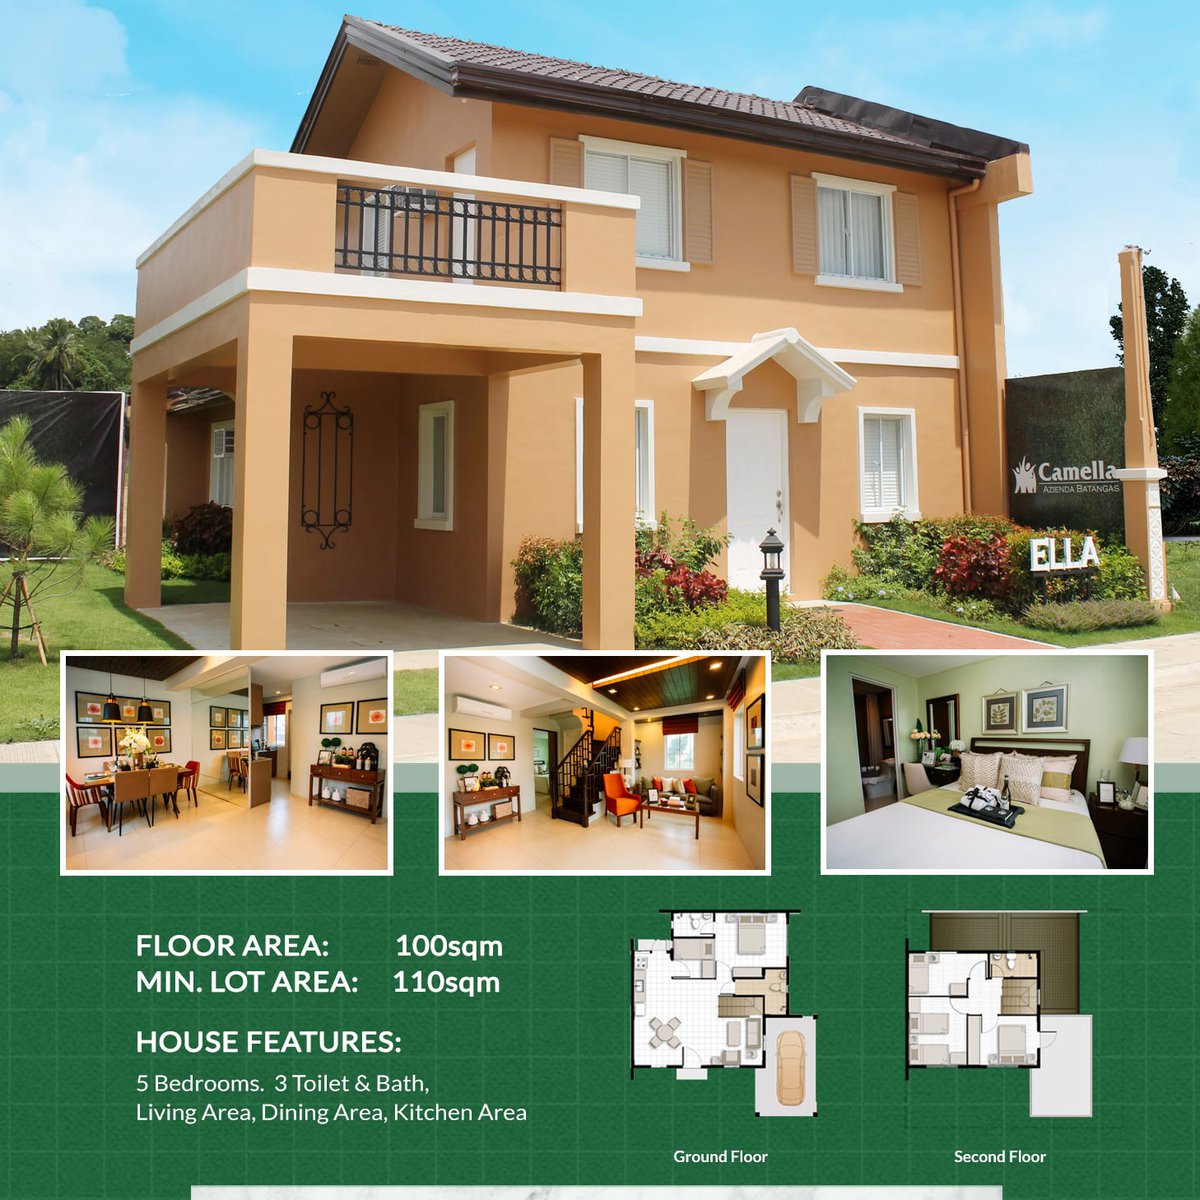 5-bedroom single detached house for sale in roxas city capiz